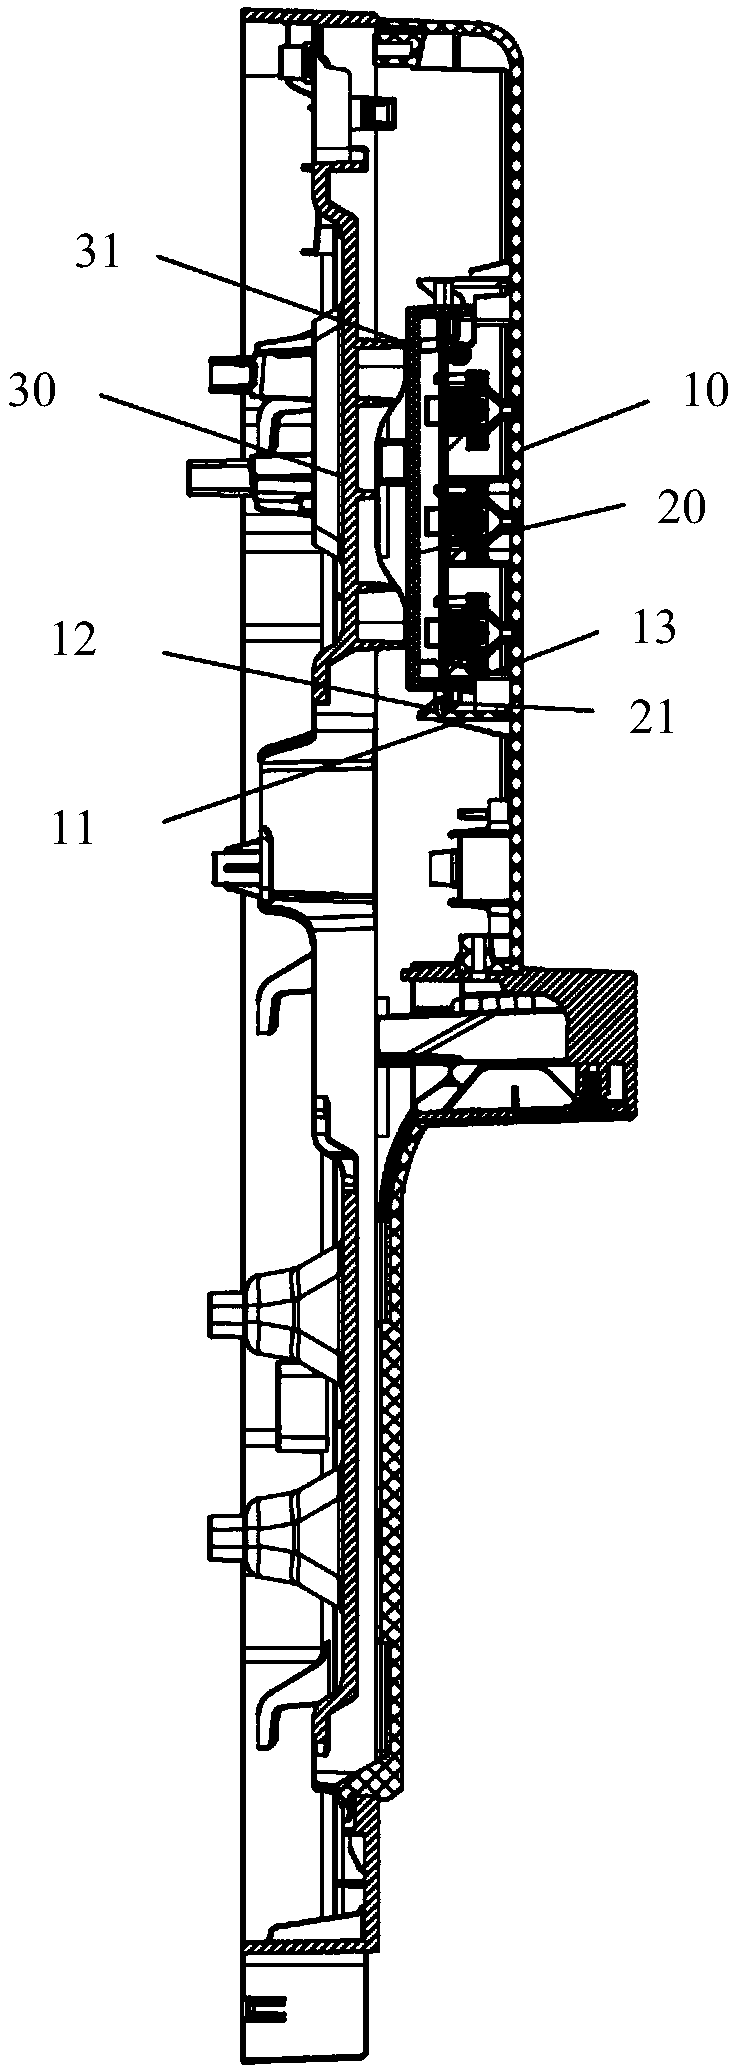 A mounting structure of an electric appliance box and an electric appliance